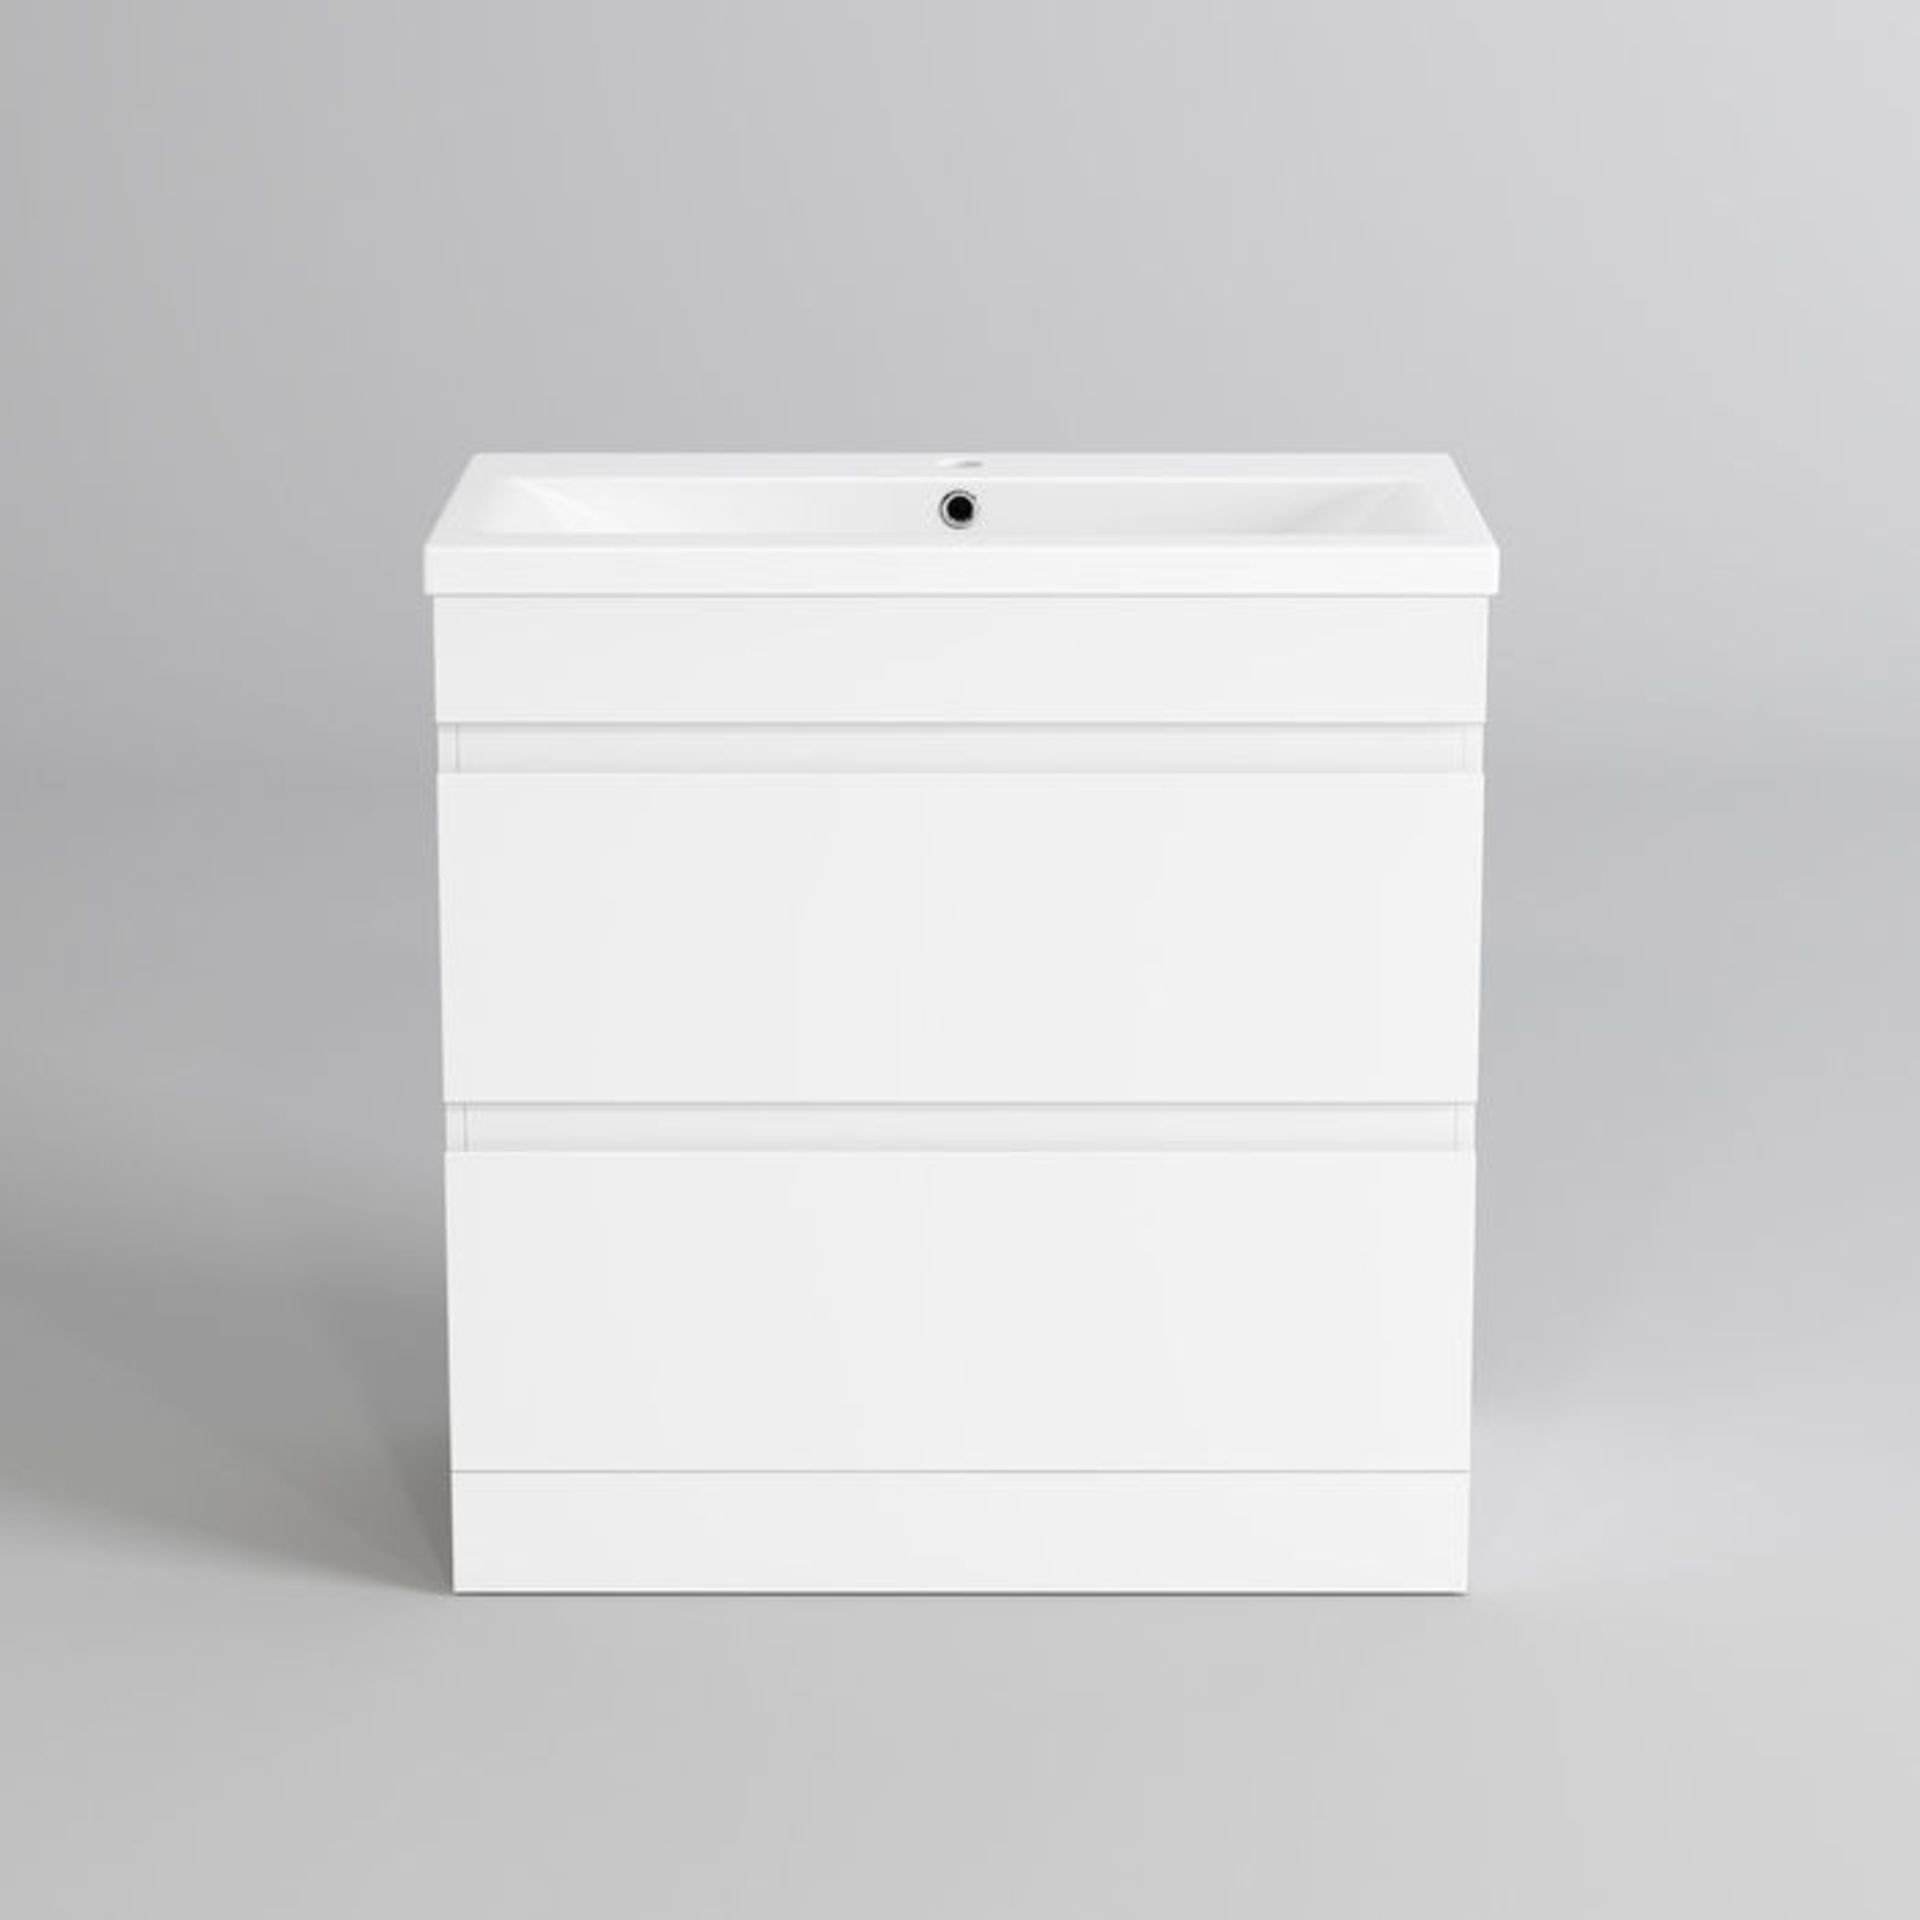 (XM185) 800mm Trent High Gloss White Double Drawer Basin Cabinet - Floor Standing. RRP £499.99. - Image 3 of 4